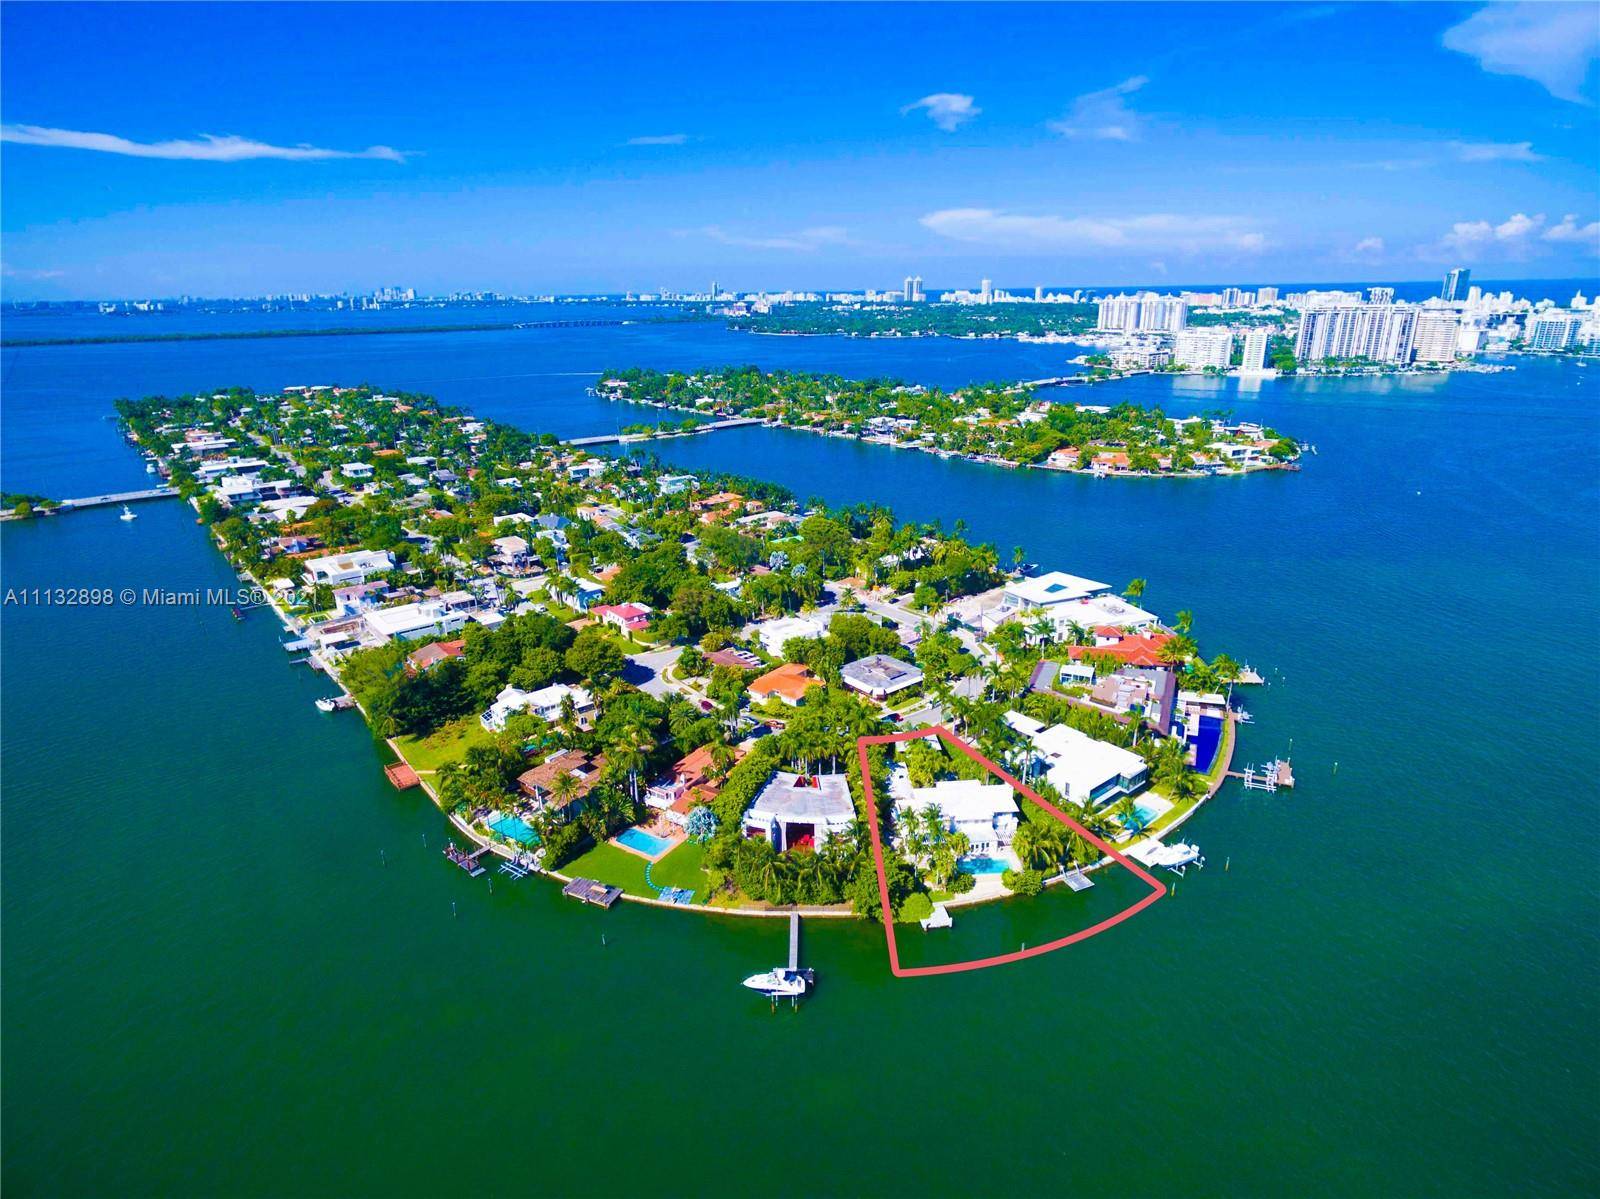 SEASONAL FURNISHED RENTAL VENETIAN ISLANDS VILLA ON OVERSIZED PIE SHAPED LOT WITH DIRECT DOWNTOWN WIDE BAY VIEWS OVERLOOKING MAGICAL SUNSETS ON THE TIP OF DILIDO ISLAND !